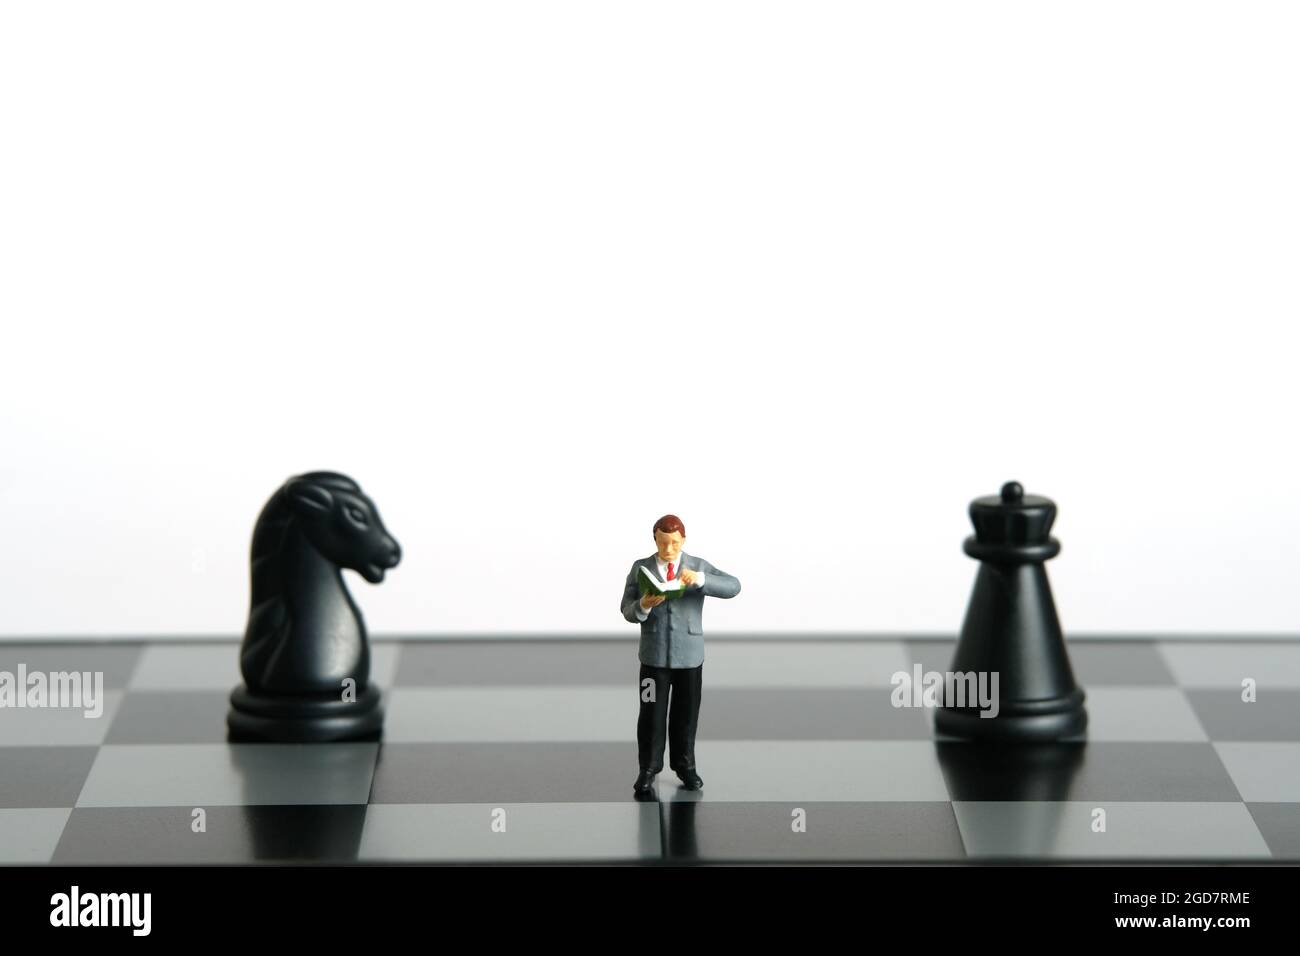 Miniature people toy figure photography. Defensive or attack strategies concept. A men student standing in between horse and castle chessboard pawn kn Stock Photo